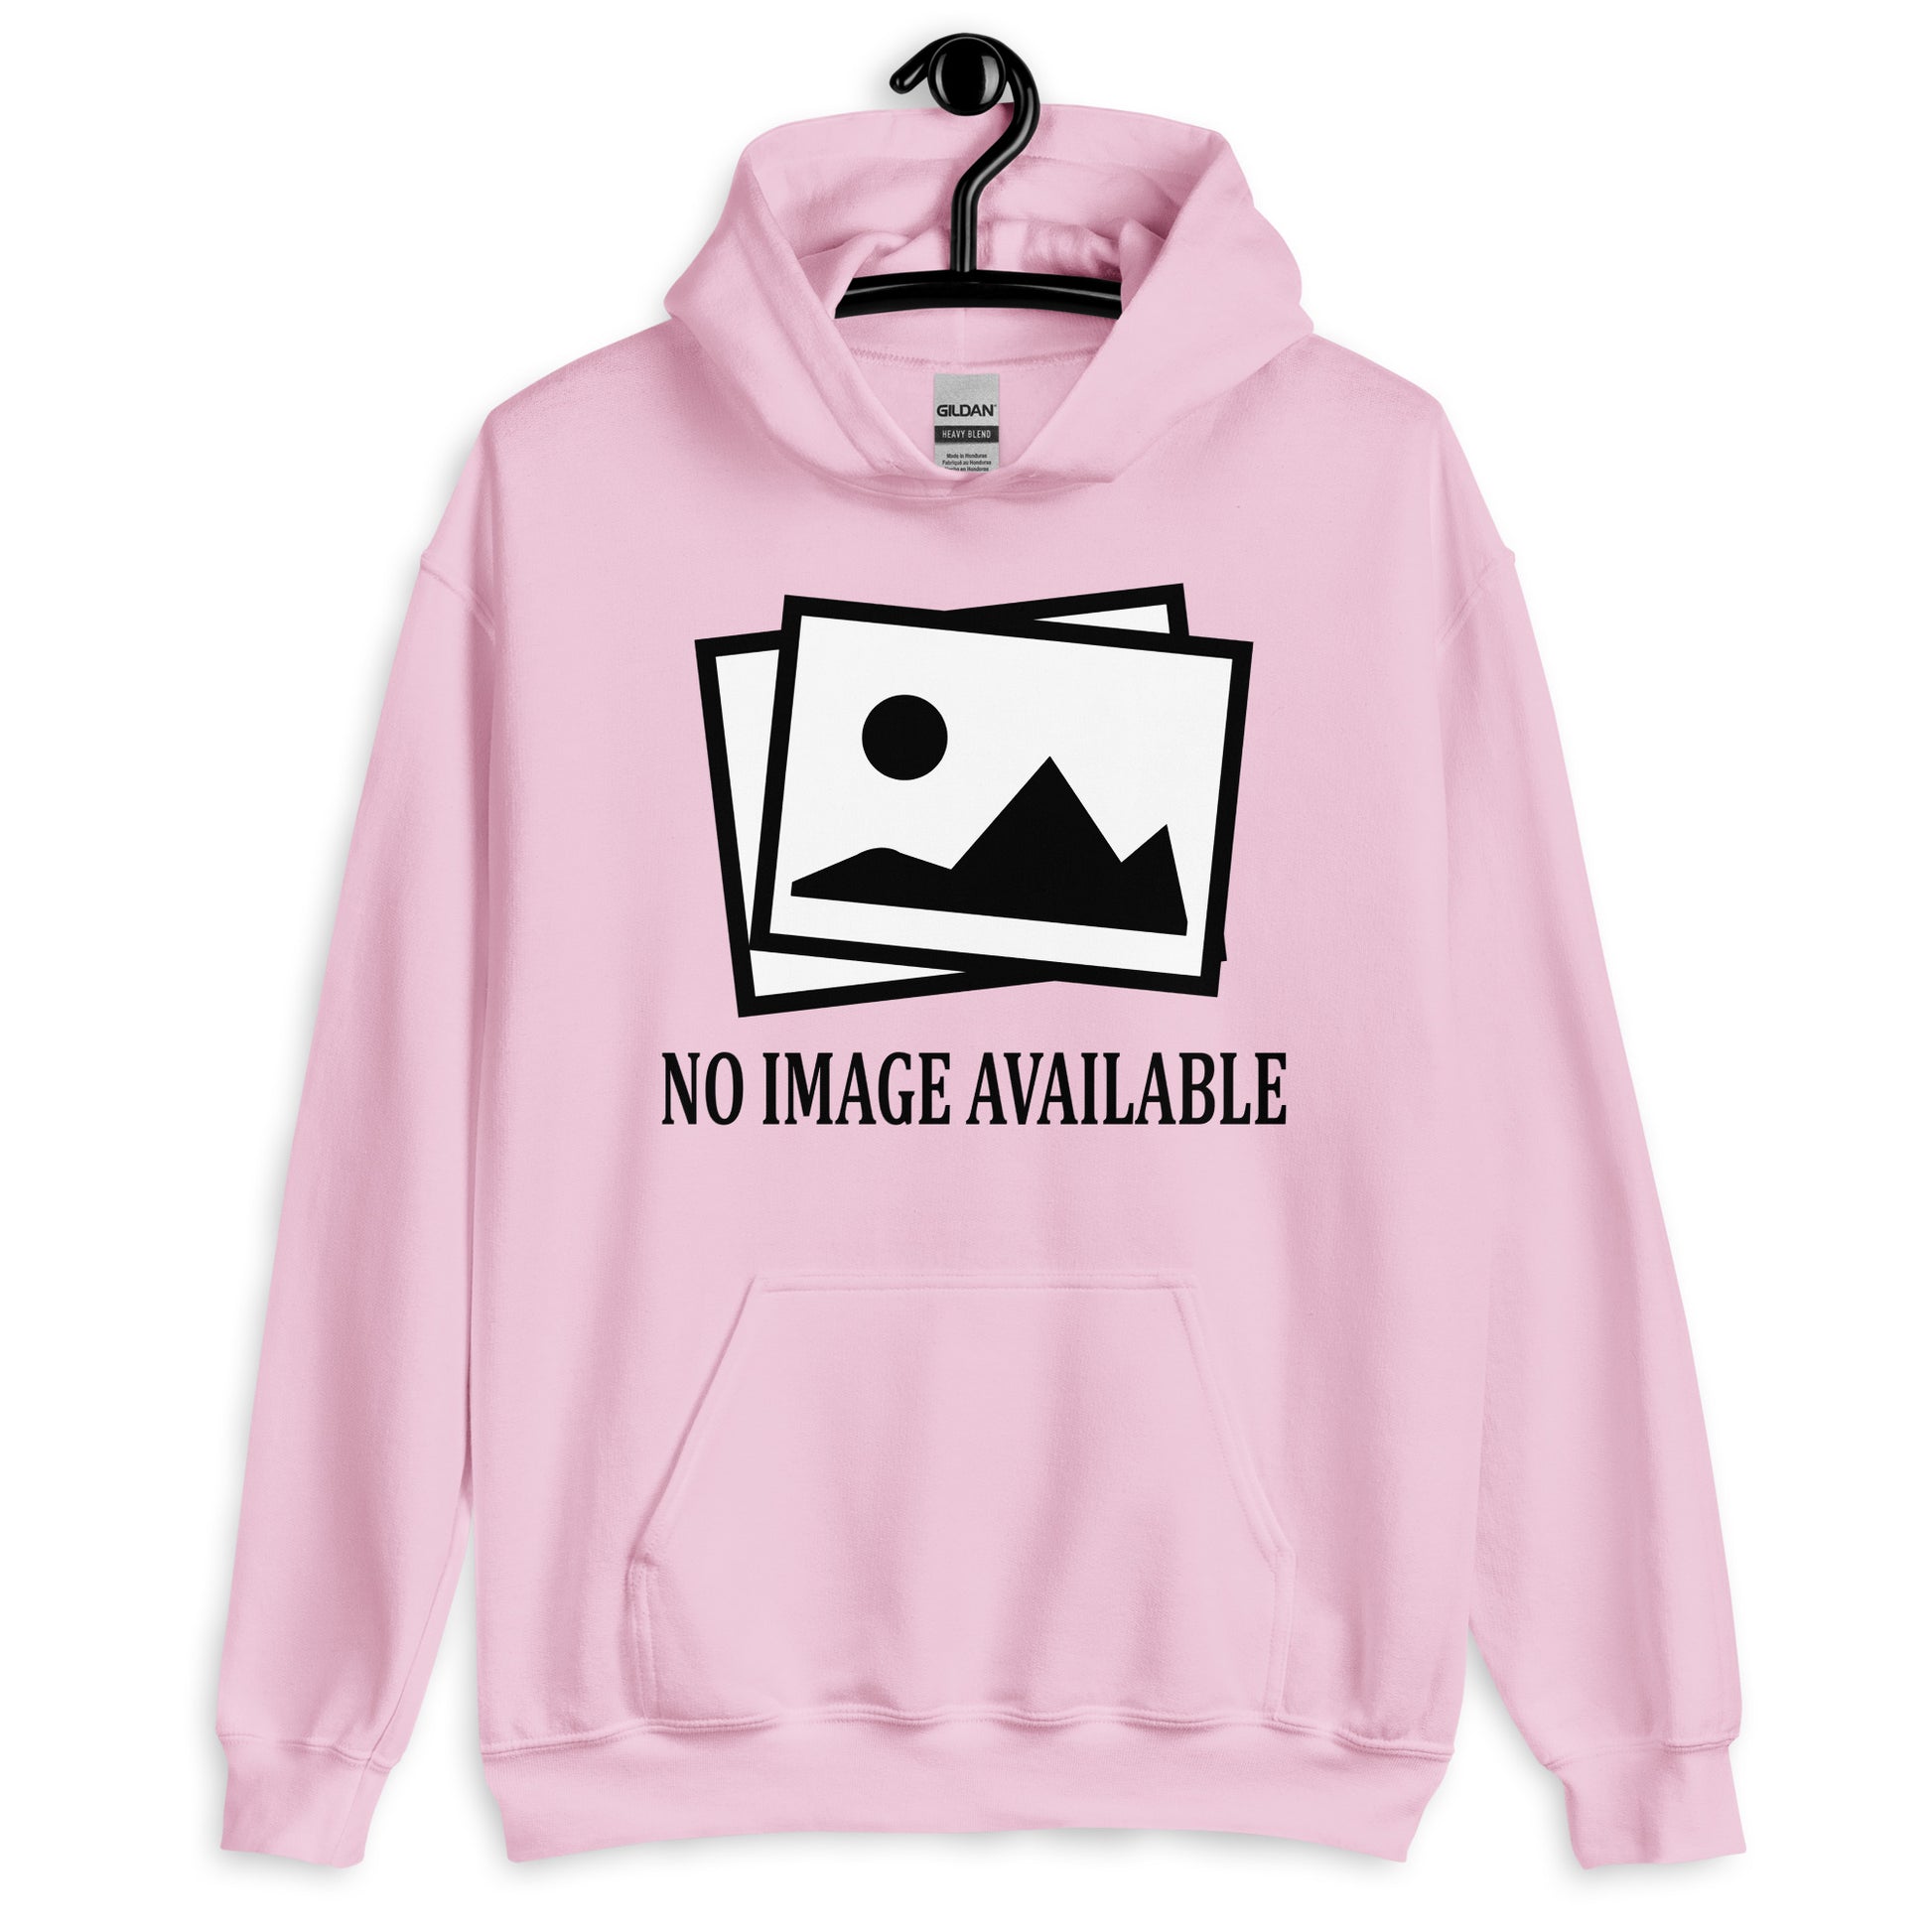 pink hoodie with image and text "no image available"